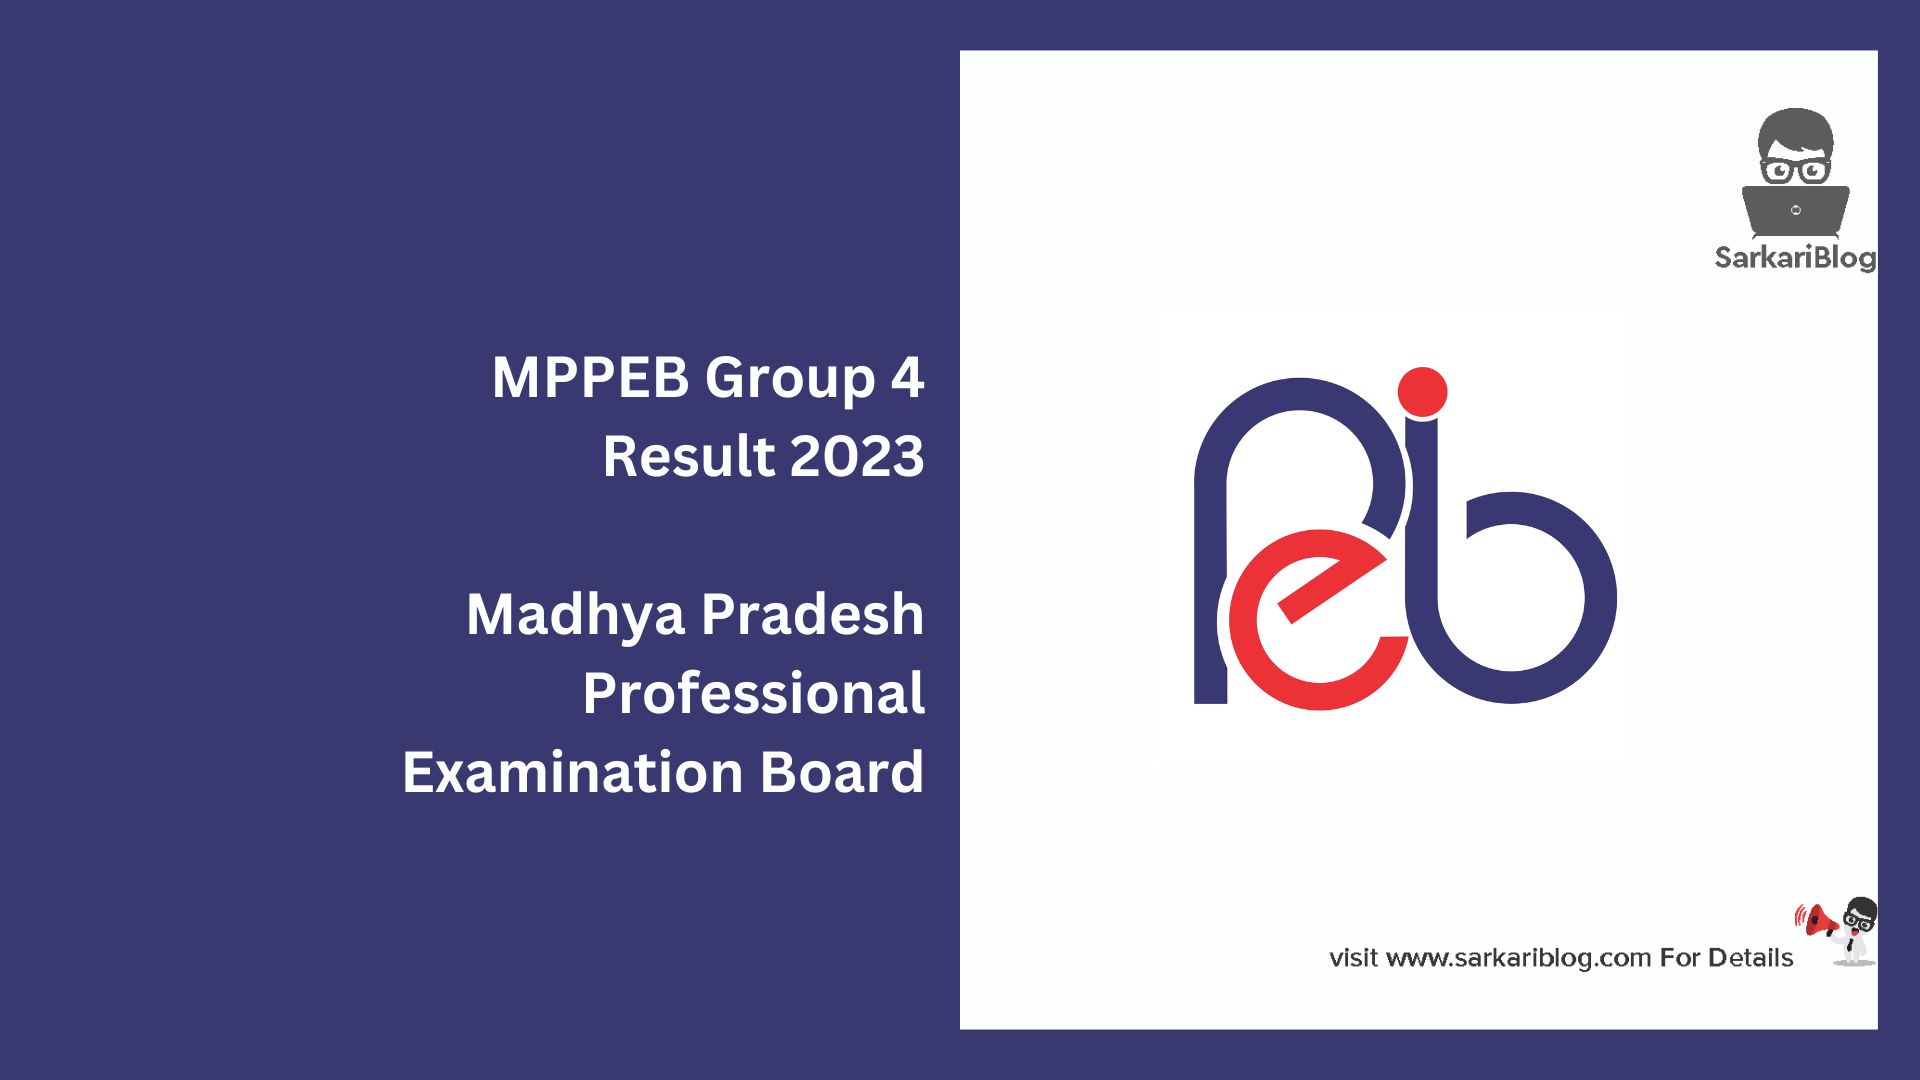 MPPEB Group 4 Result 2023